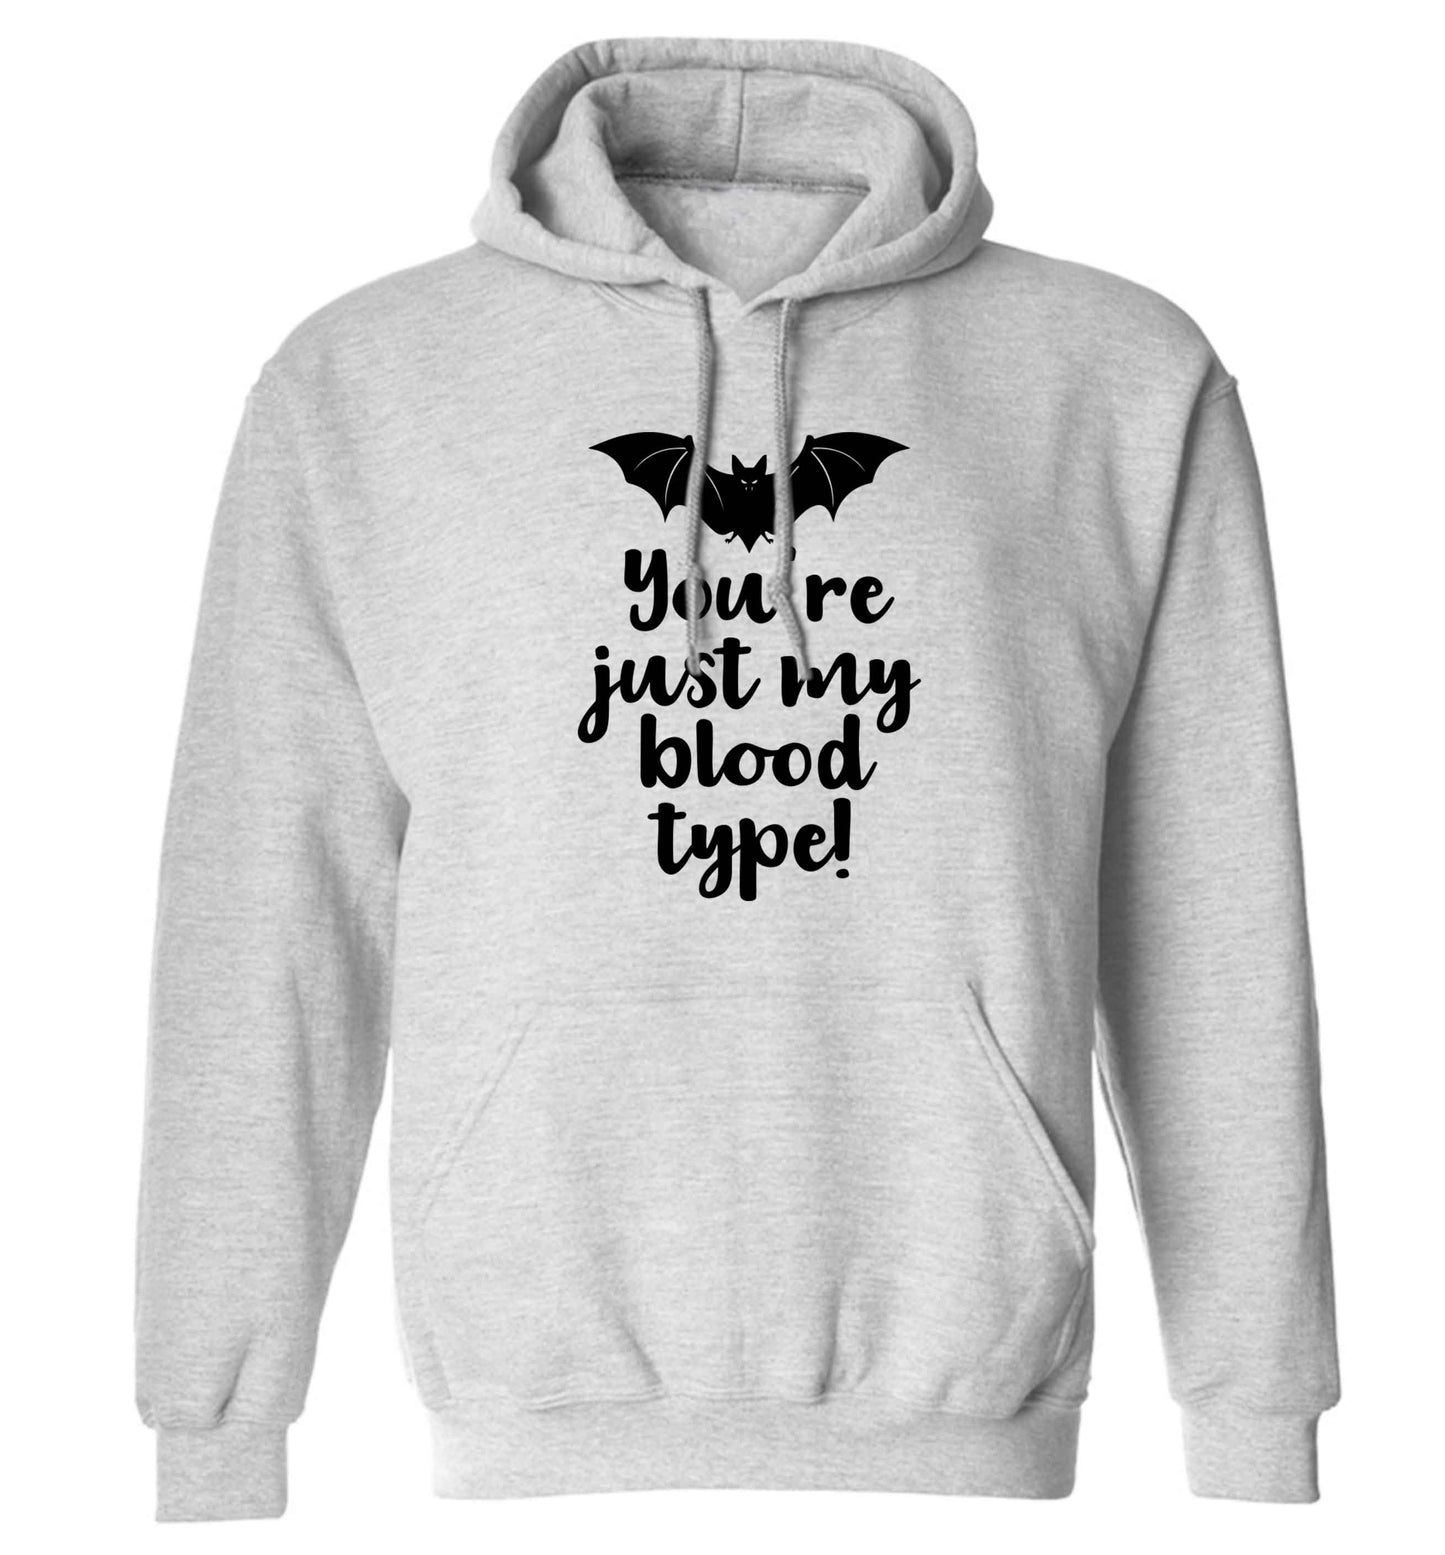 You're just my blood type adults unisex grey hoodie 2XL